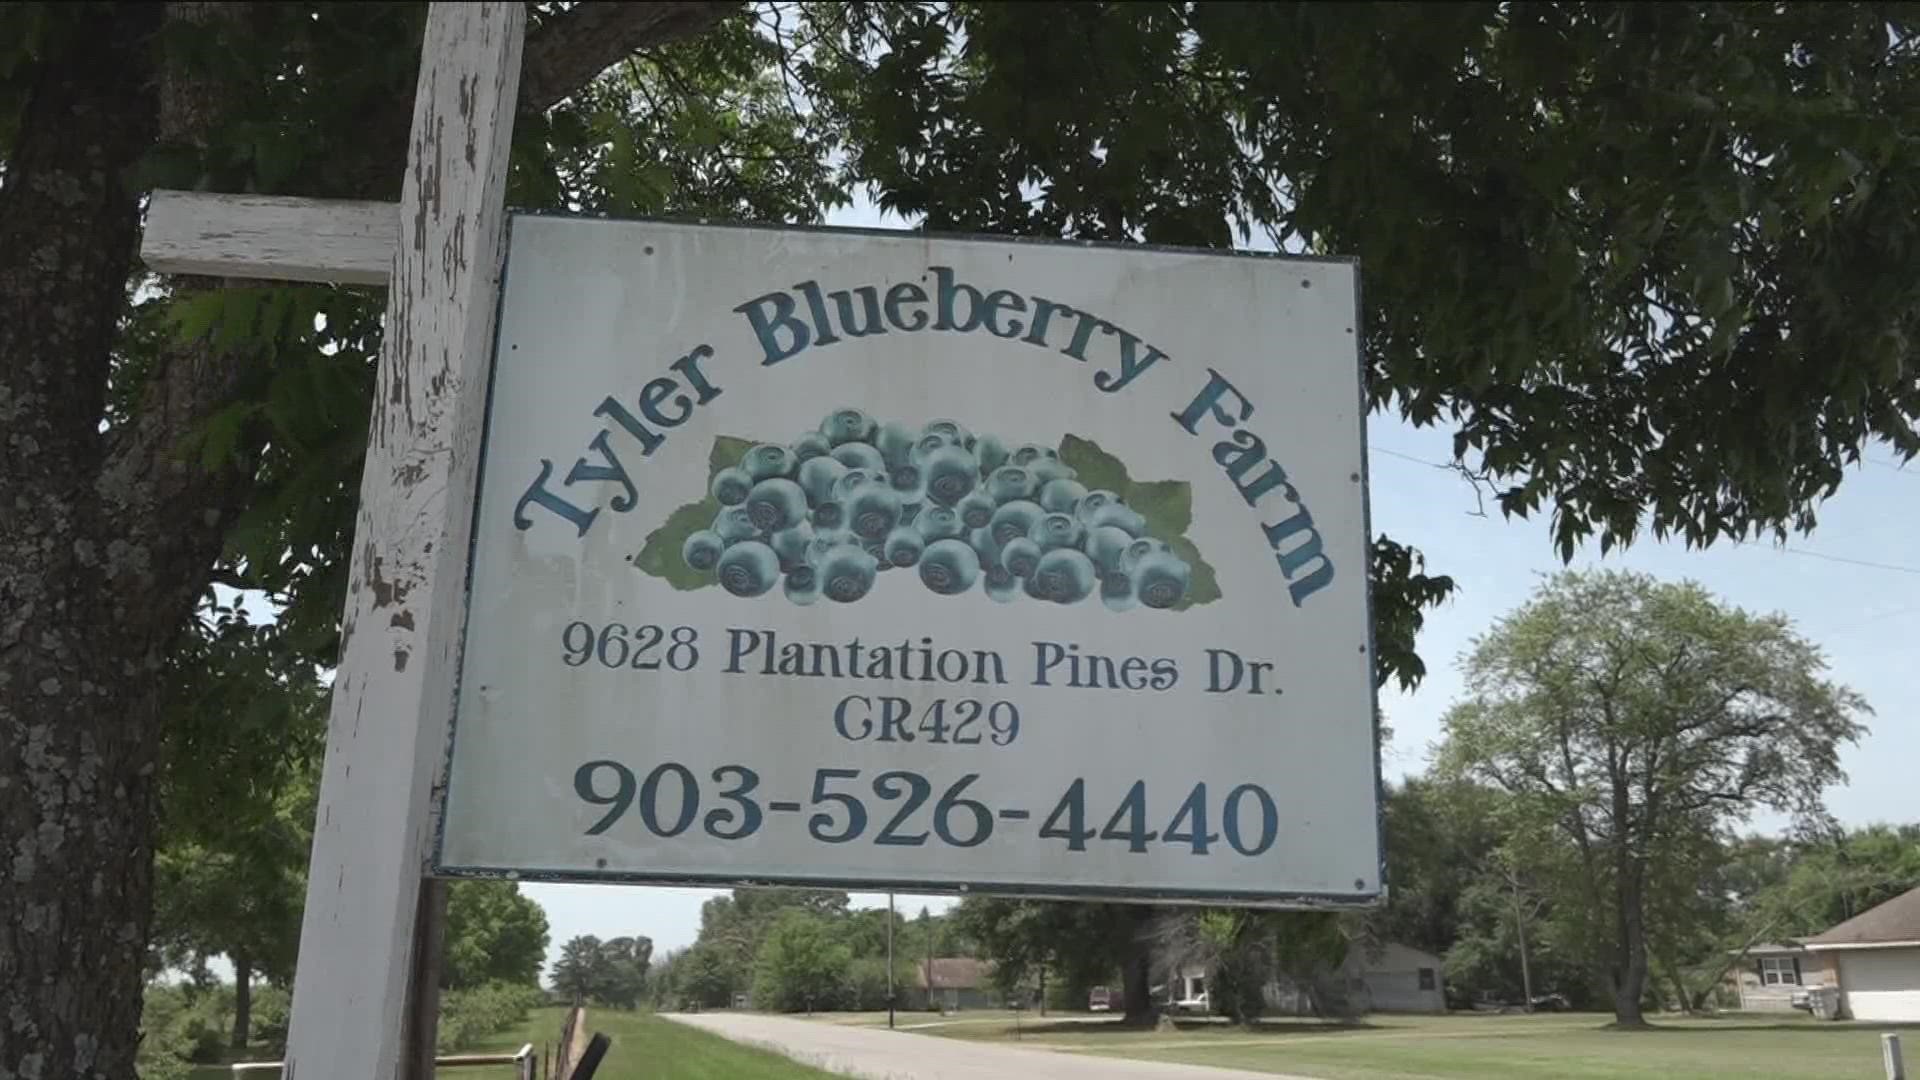 Blueberries have been plentiful this year at the Tyler Berry Farm due to the recent hot weather.